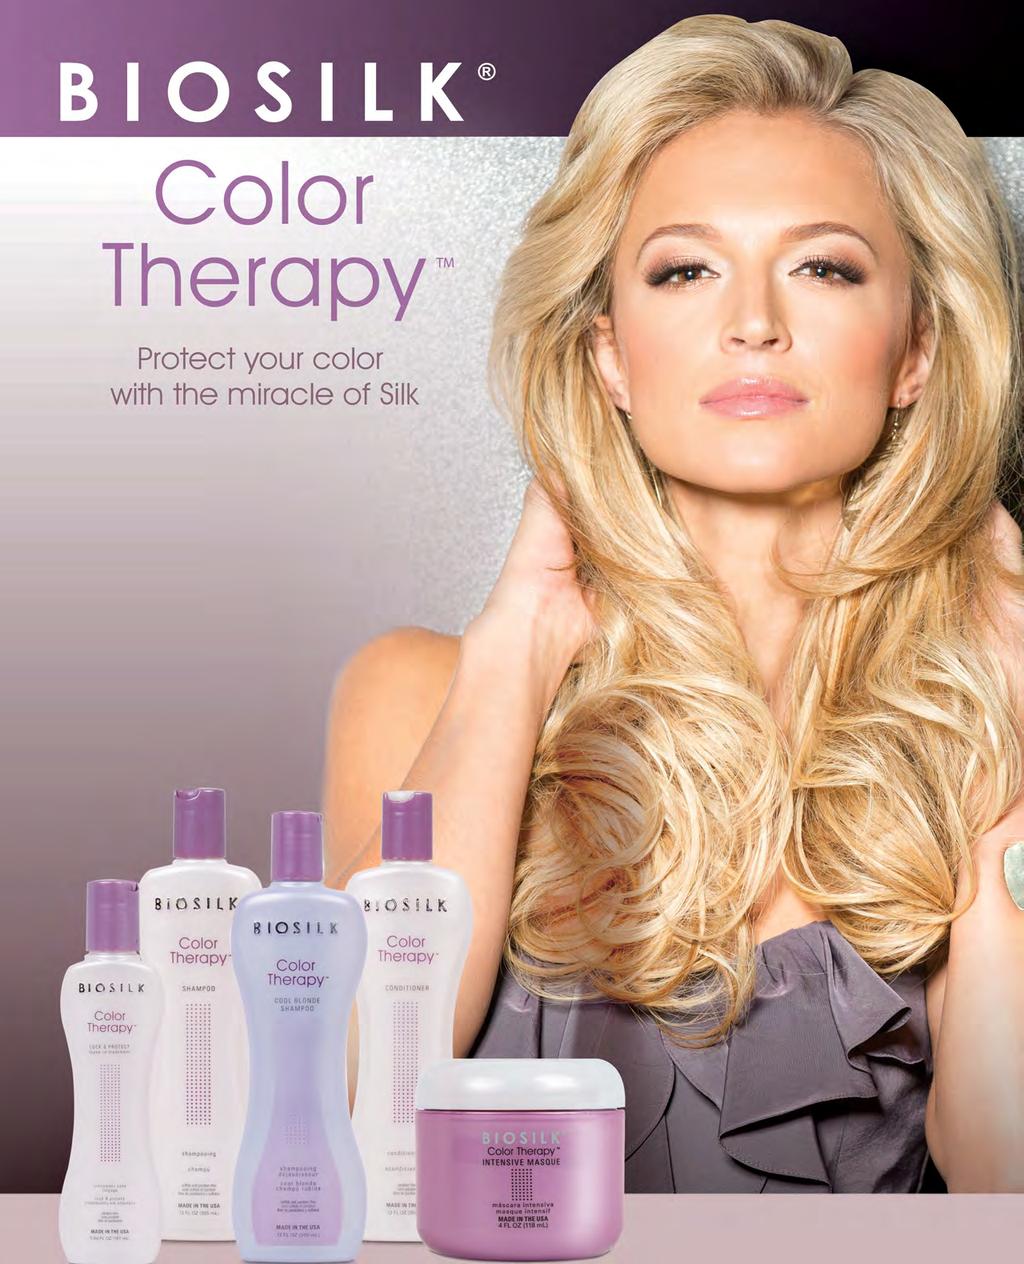 WETLINE Beautiful salon color deserves specialized care and BioSilk Color Therapy delivers.